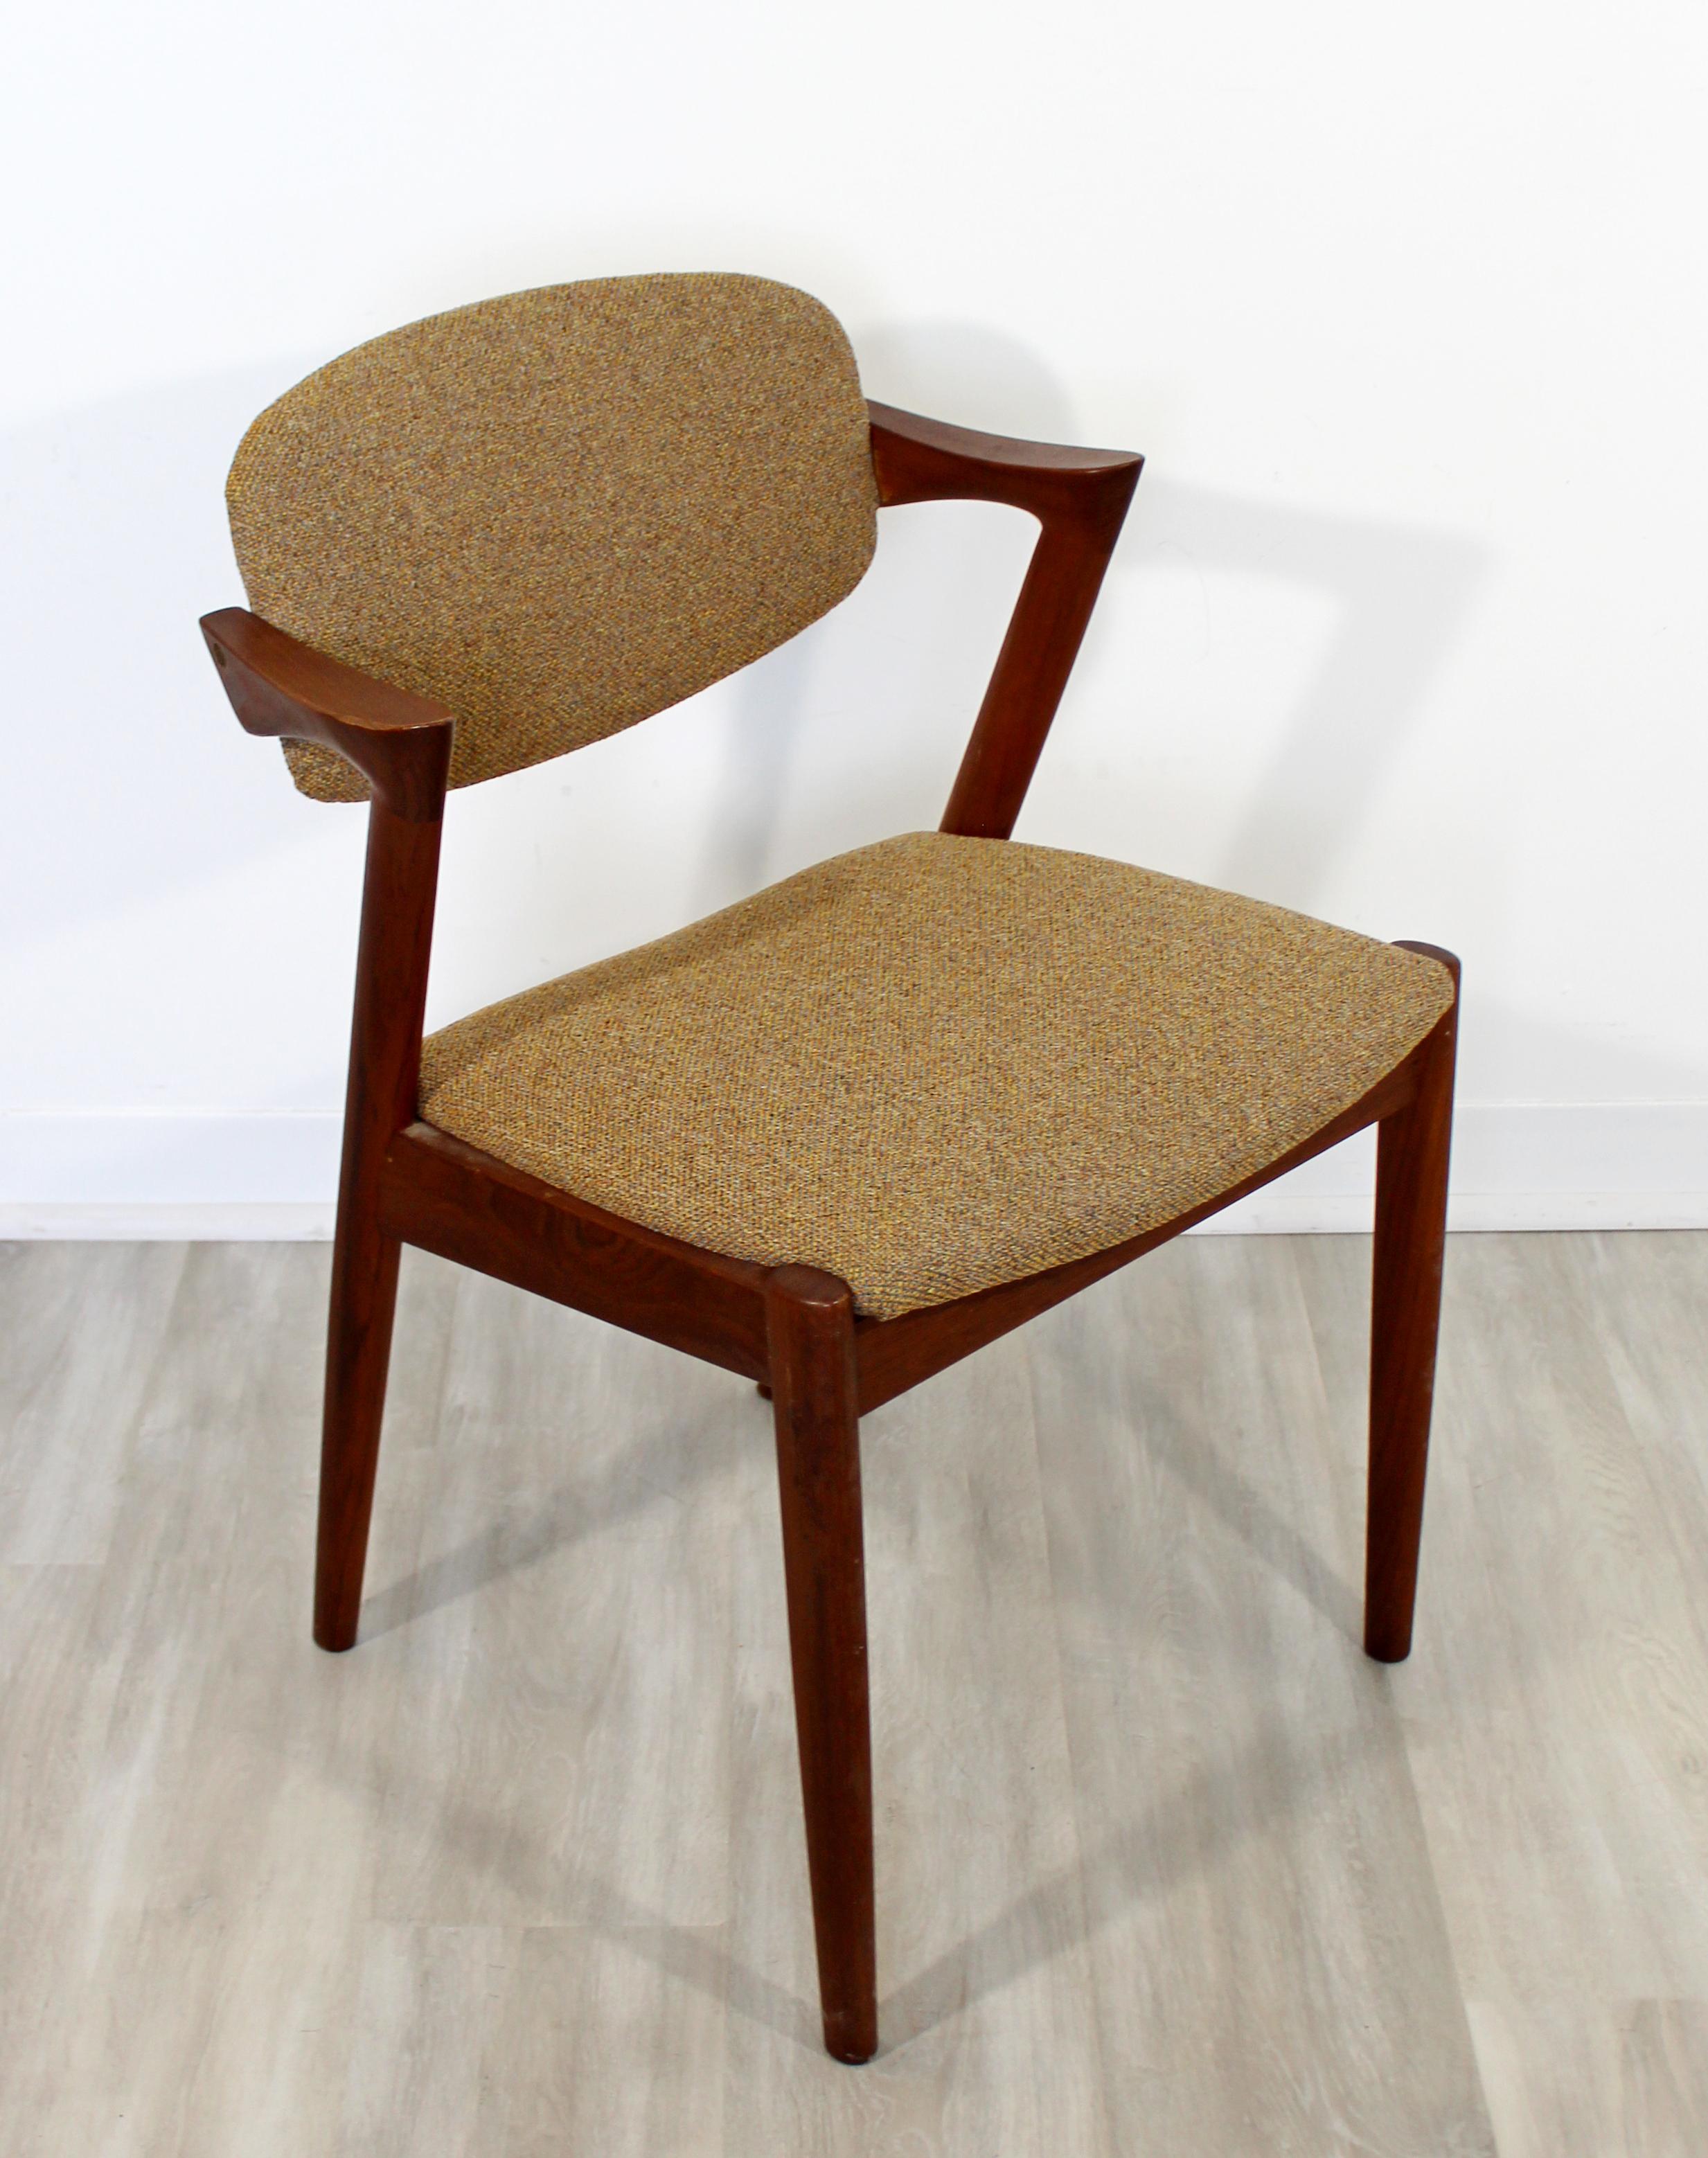 For your consideration is an beautiful, Danish teak armchair, by Kai Kristiansen, circa 1960s. In excellent vintage condition. The dimensions are 21.5